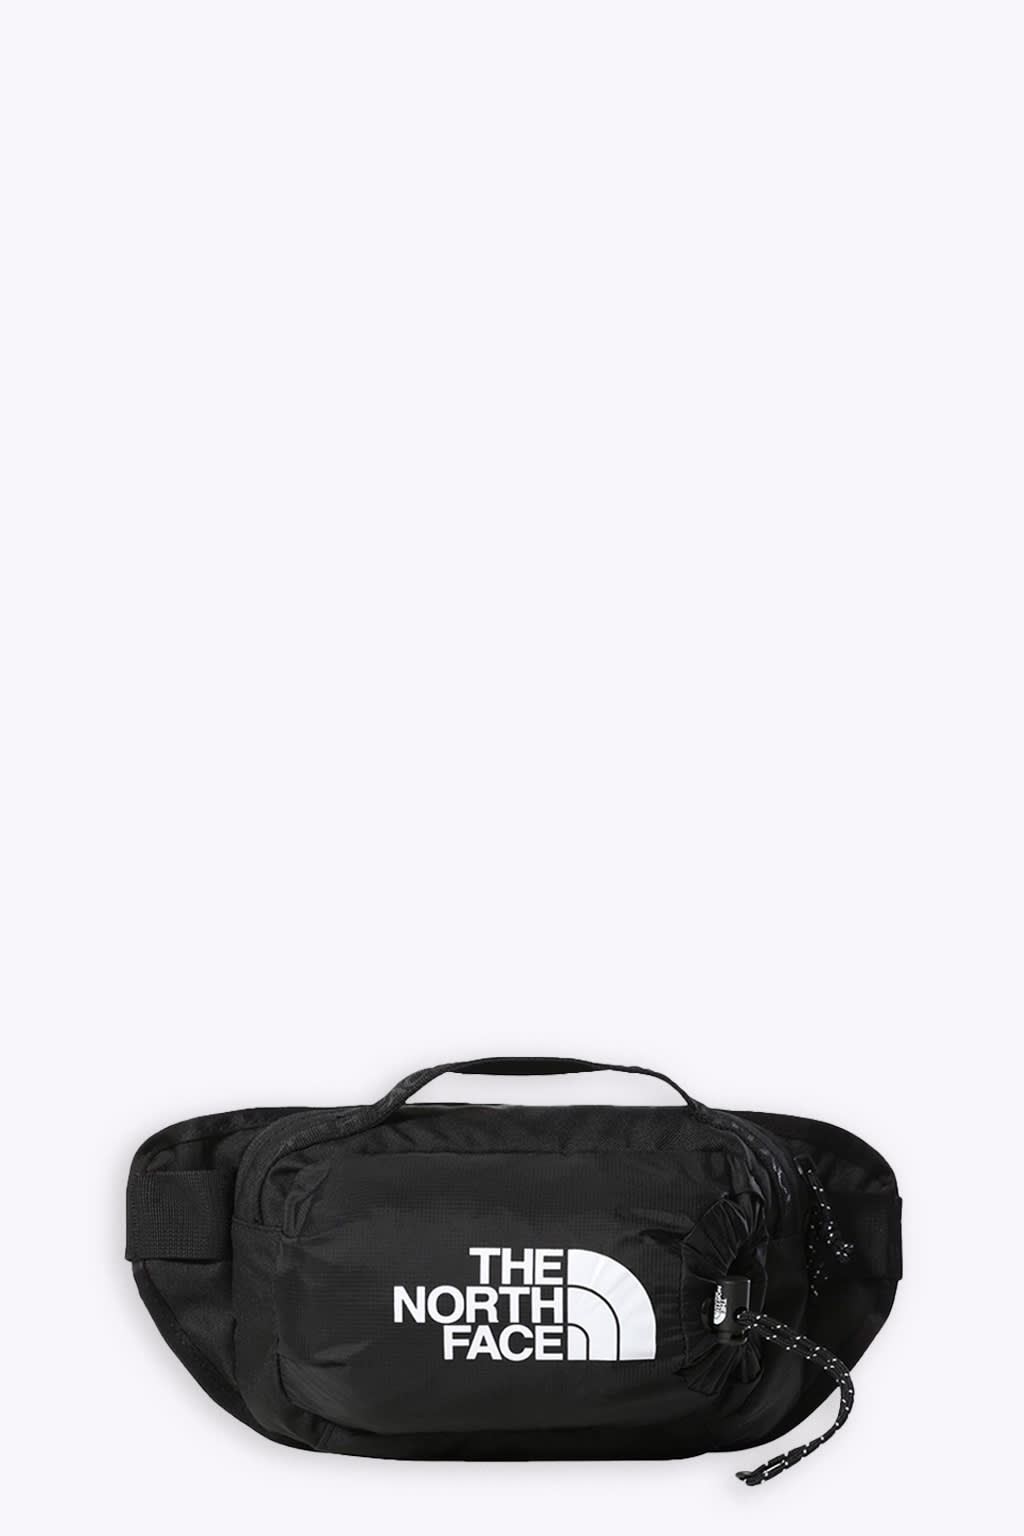 The North Face Bozer Hip Pack Iii - L Black nylon fanny pack - Bozer hip pack III L